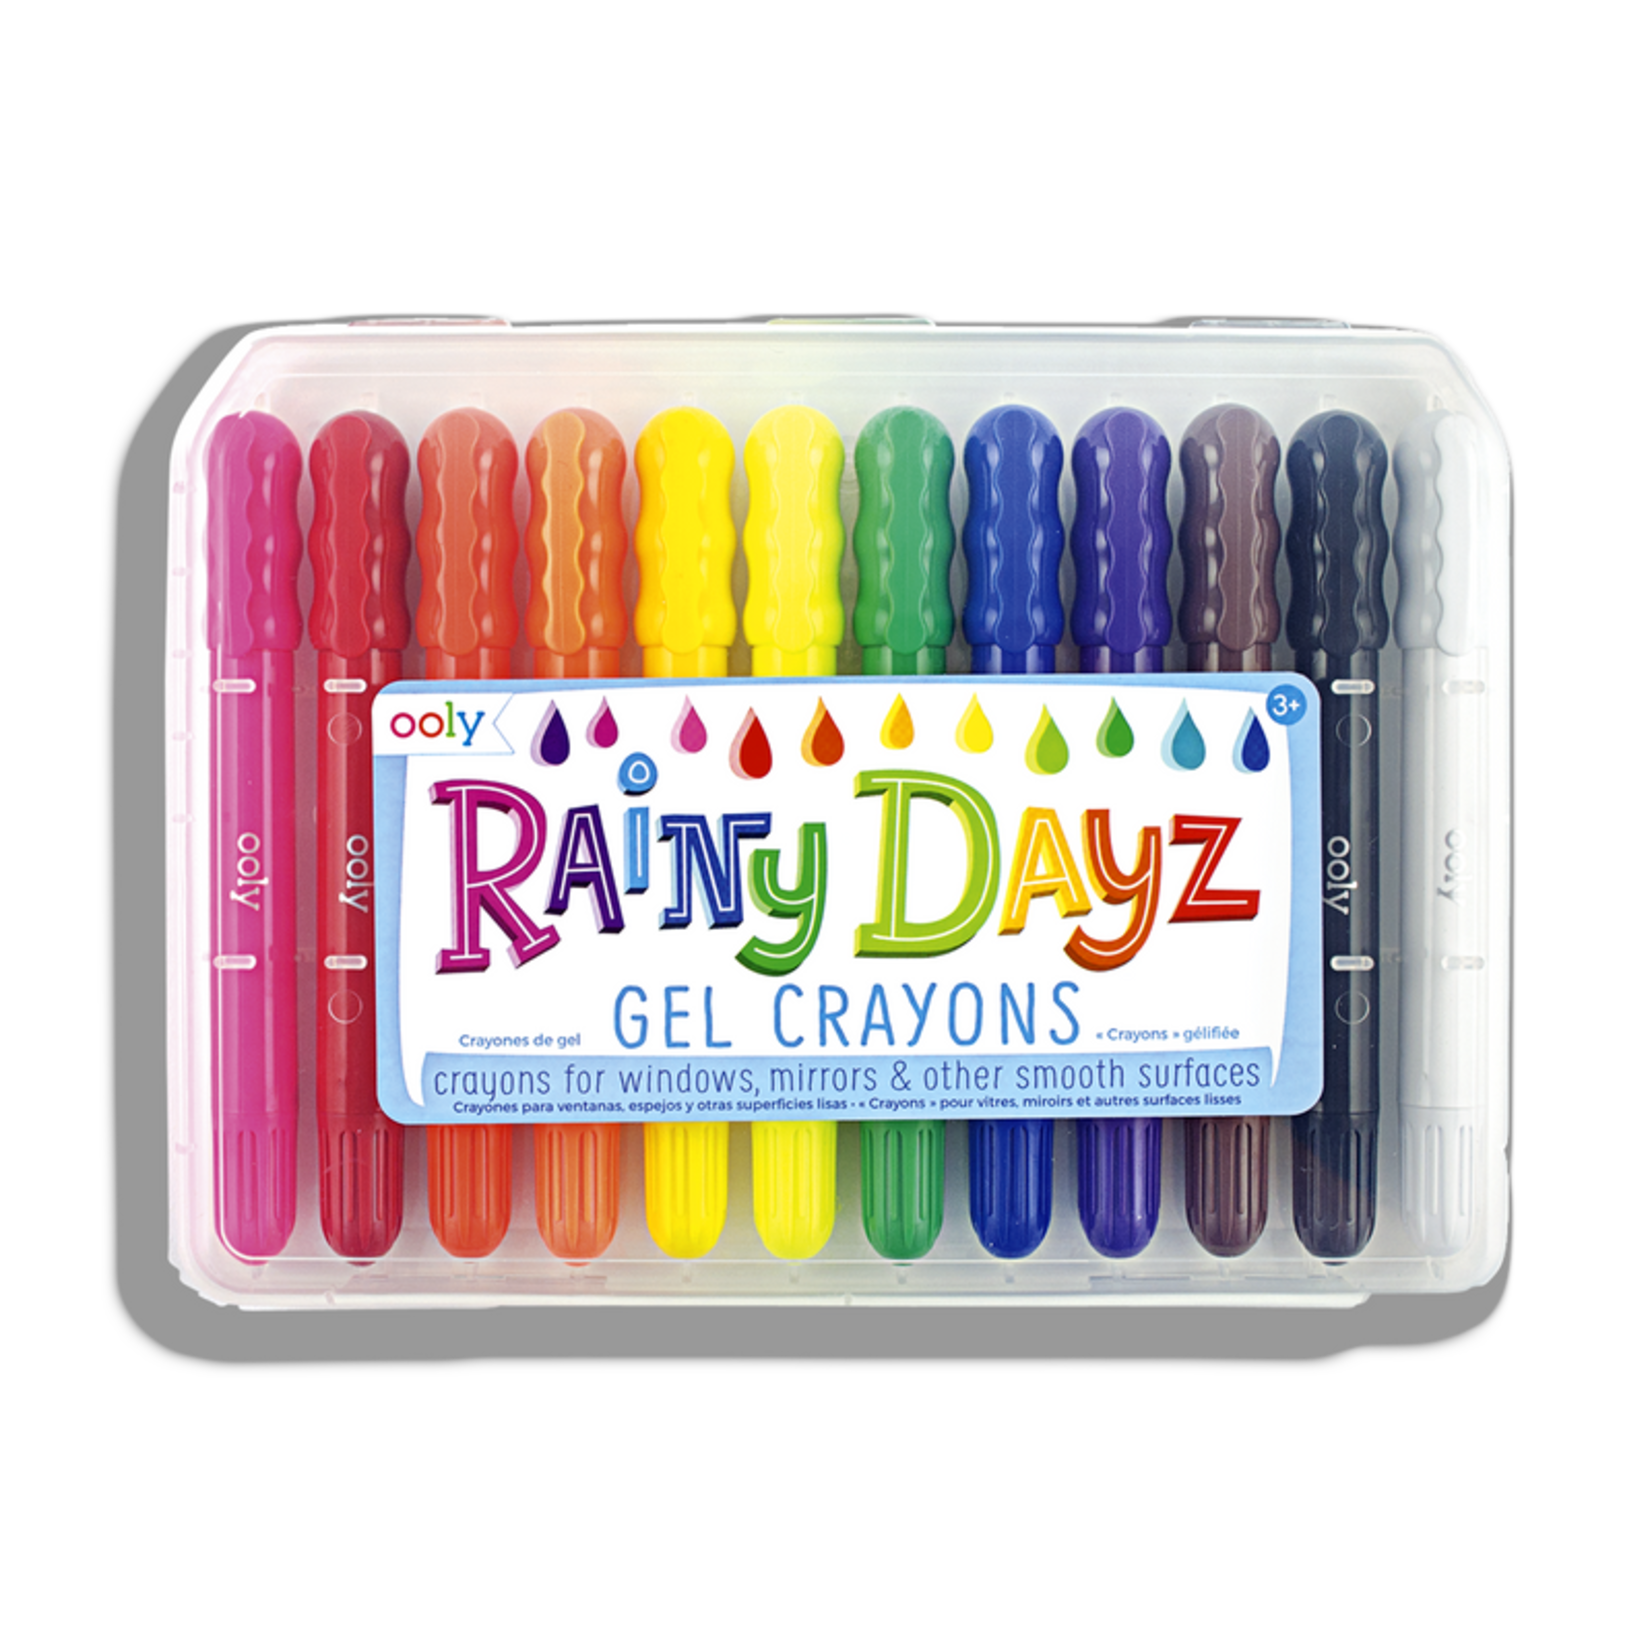 OOLY Rainy Day Gel Crayons - Set of 12